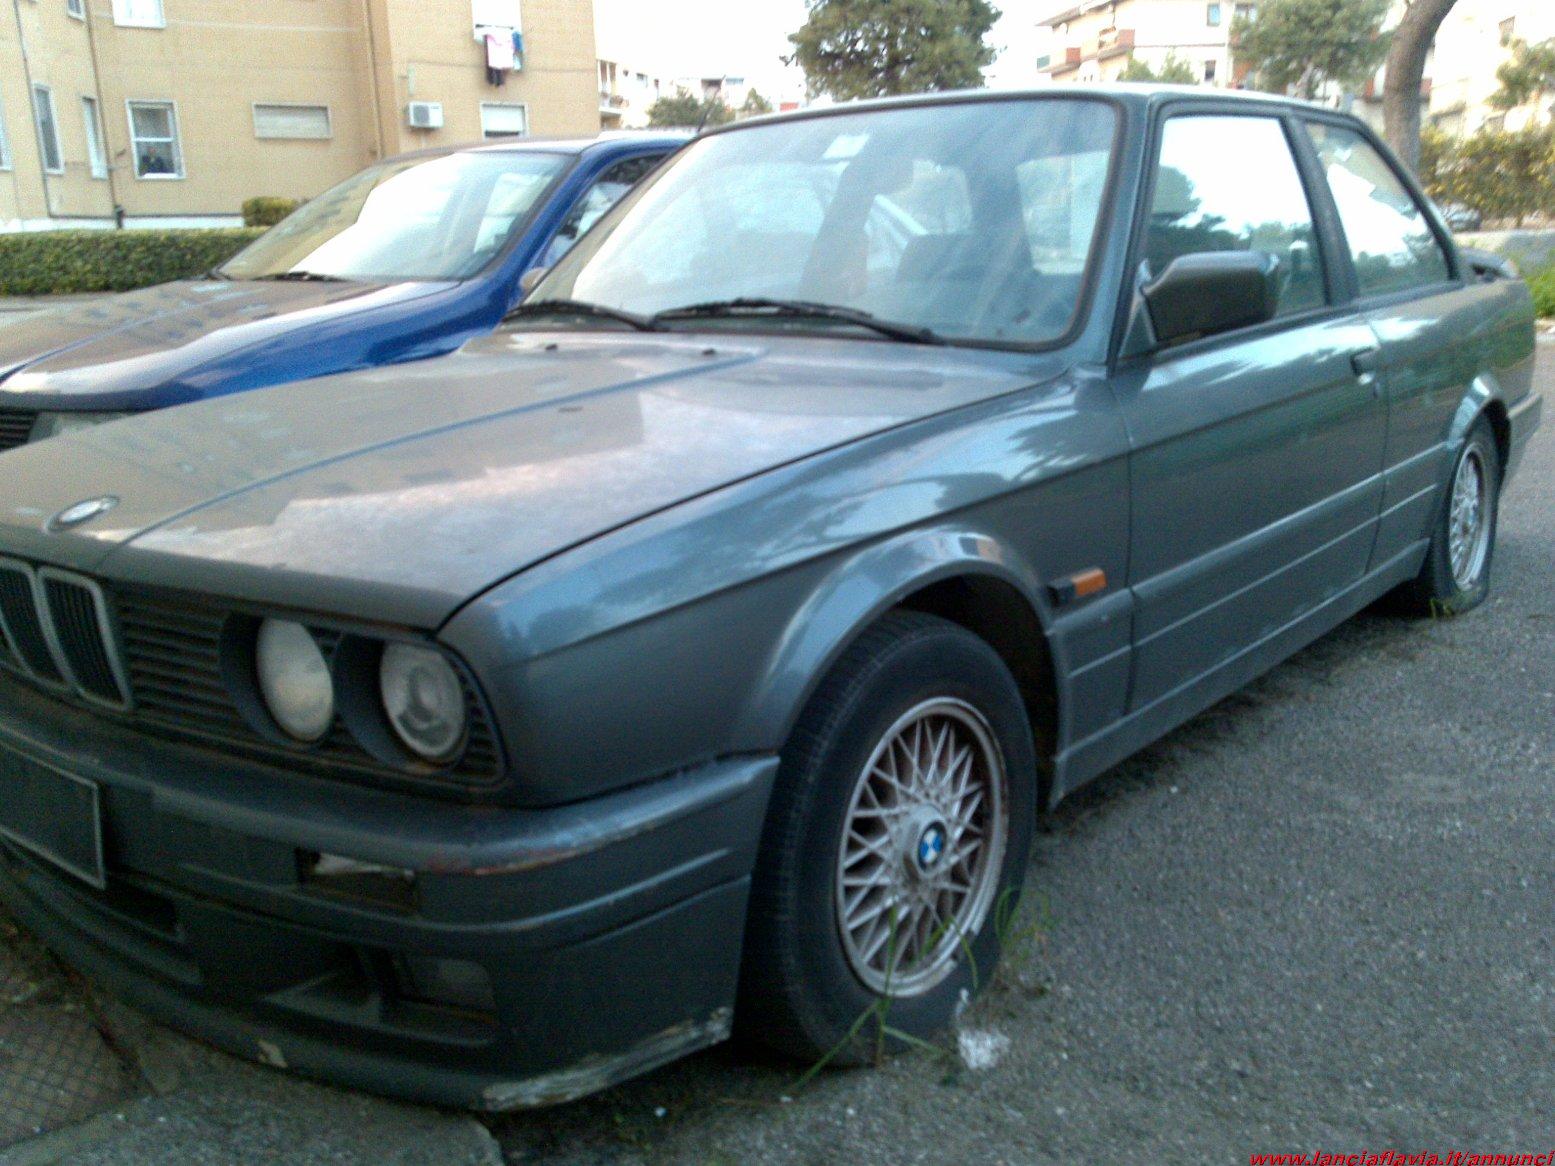 Bmw 320is e30 specs #5